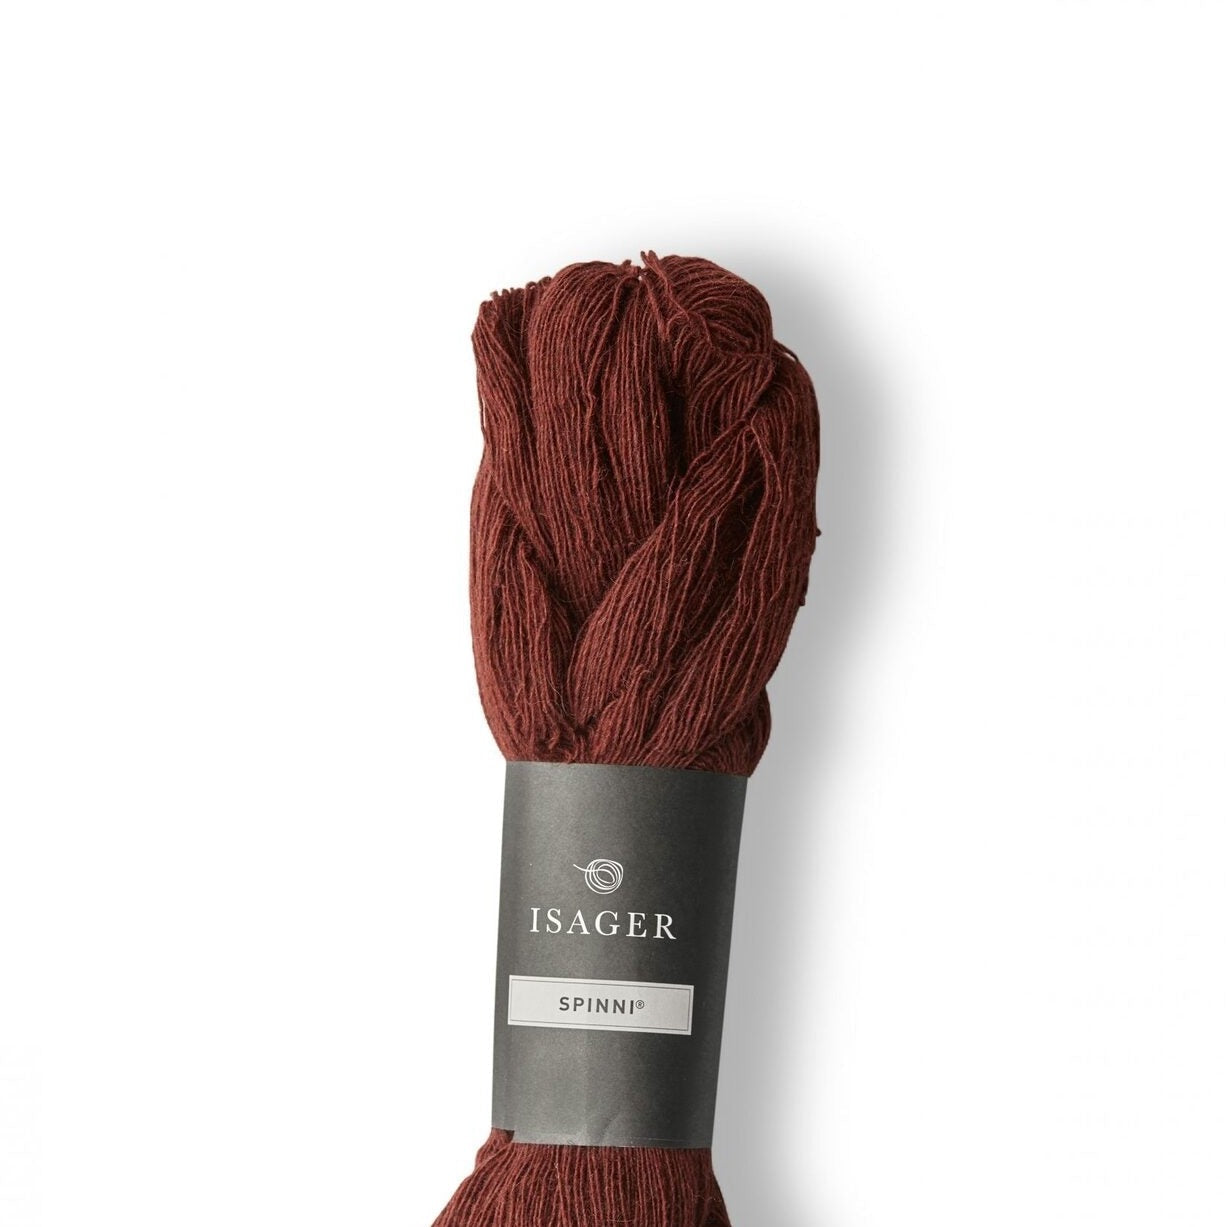 Isager Spinni - 33s - 2 Ply - Isager - The Little Yarn Store